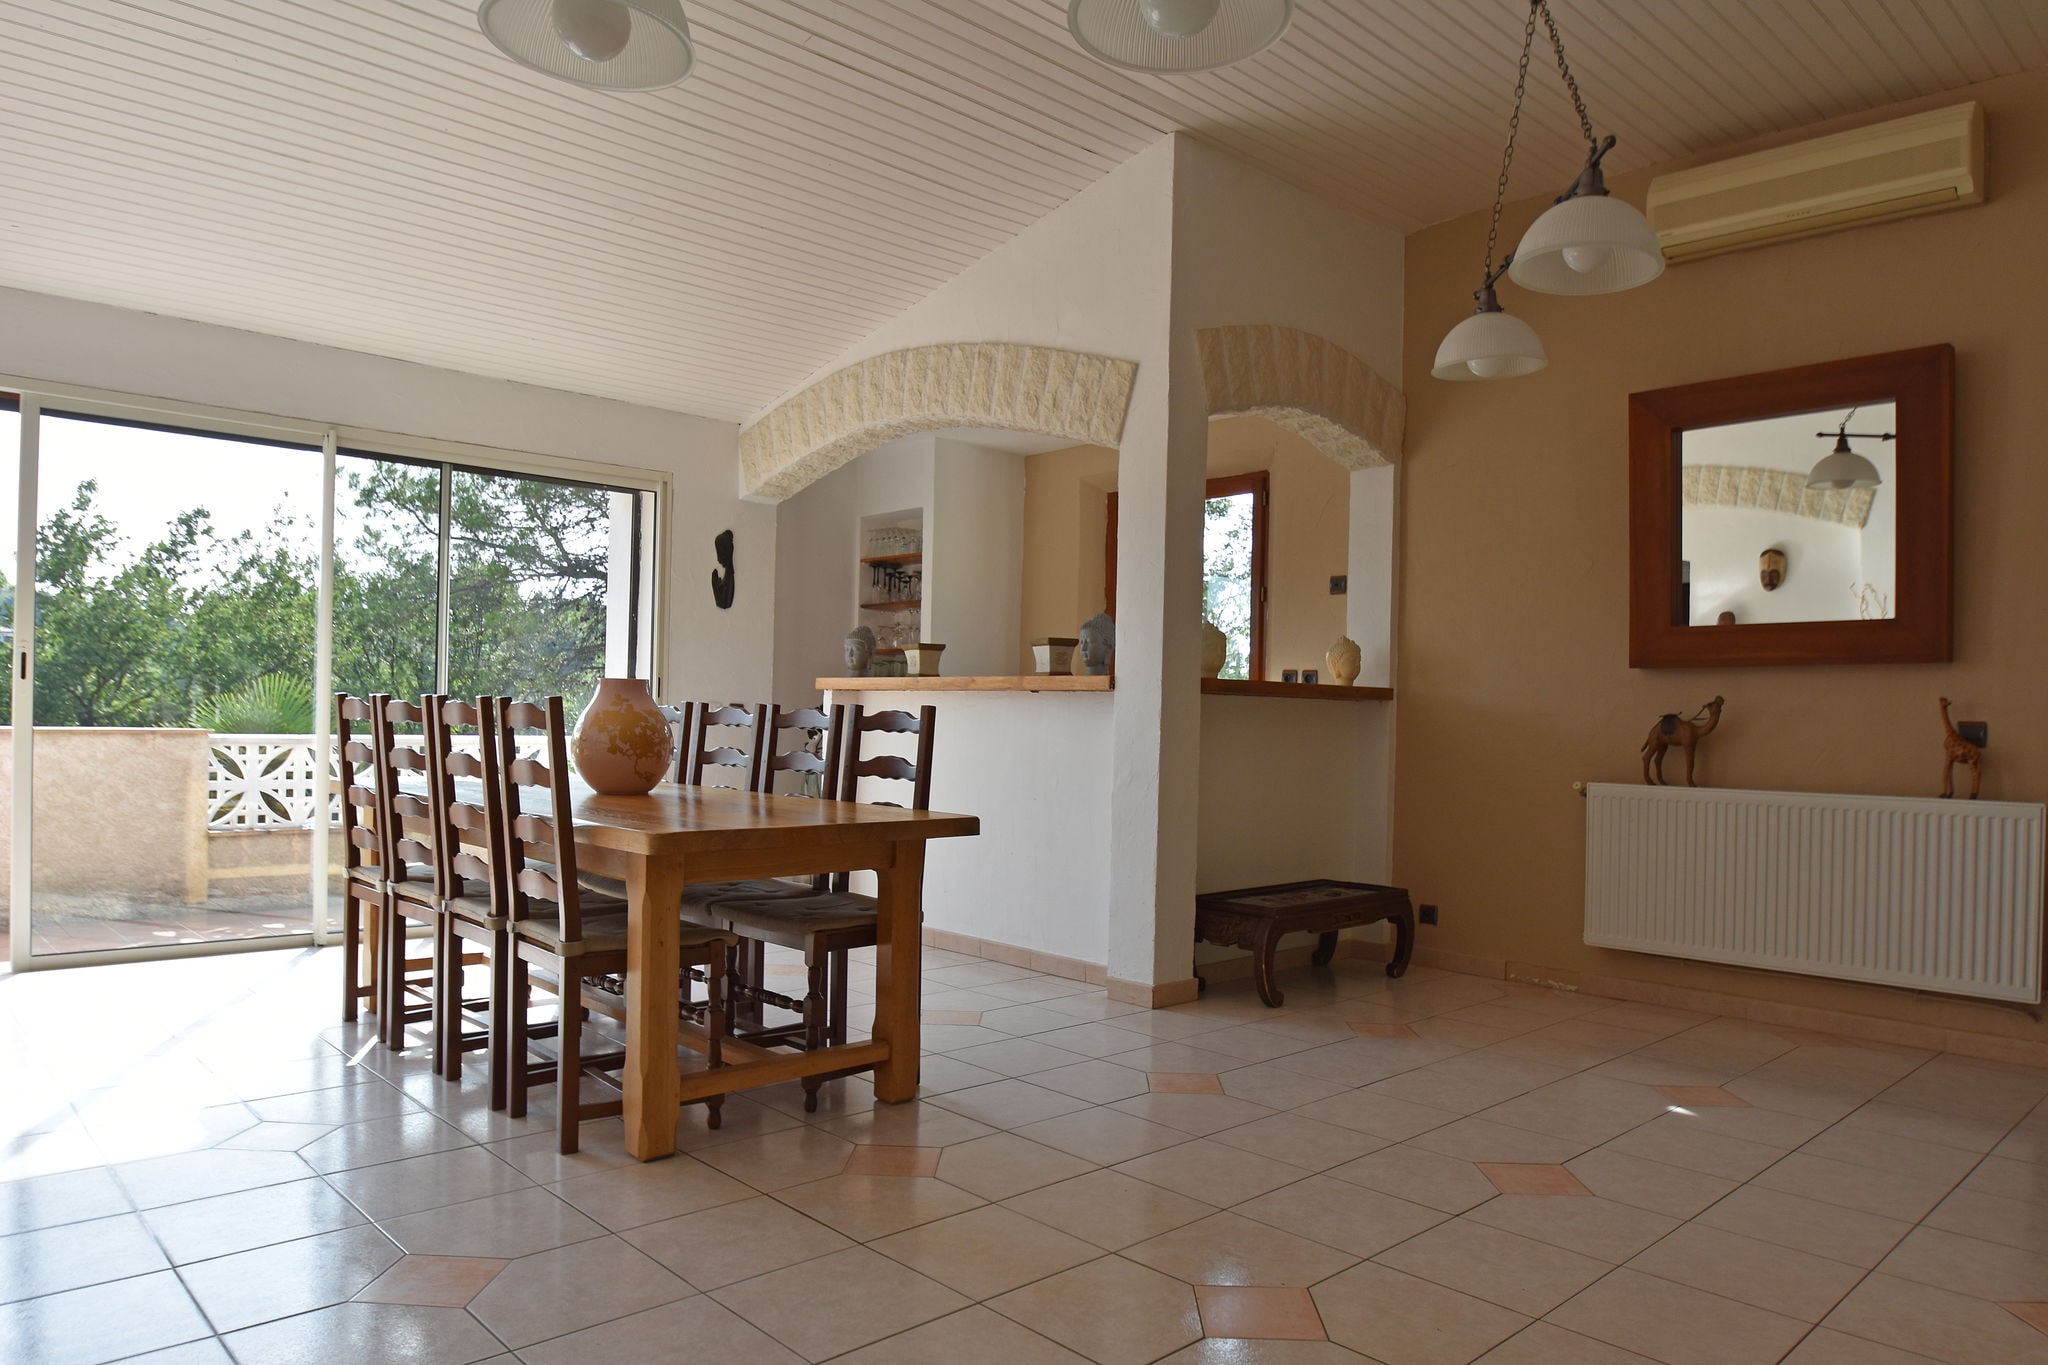 Beautiful, modernly decorated Provençal house only 30 kilometres from Cannes